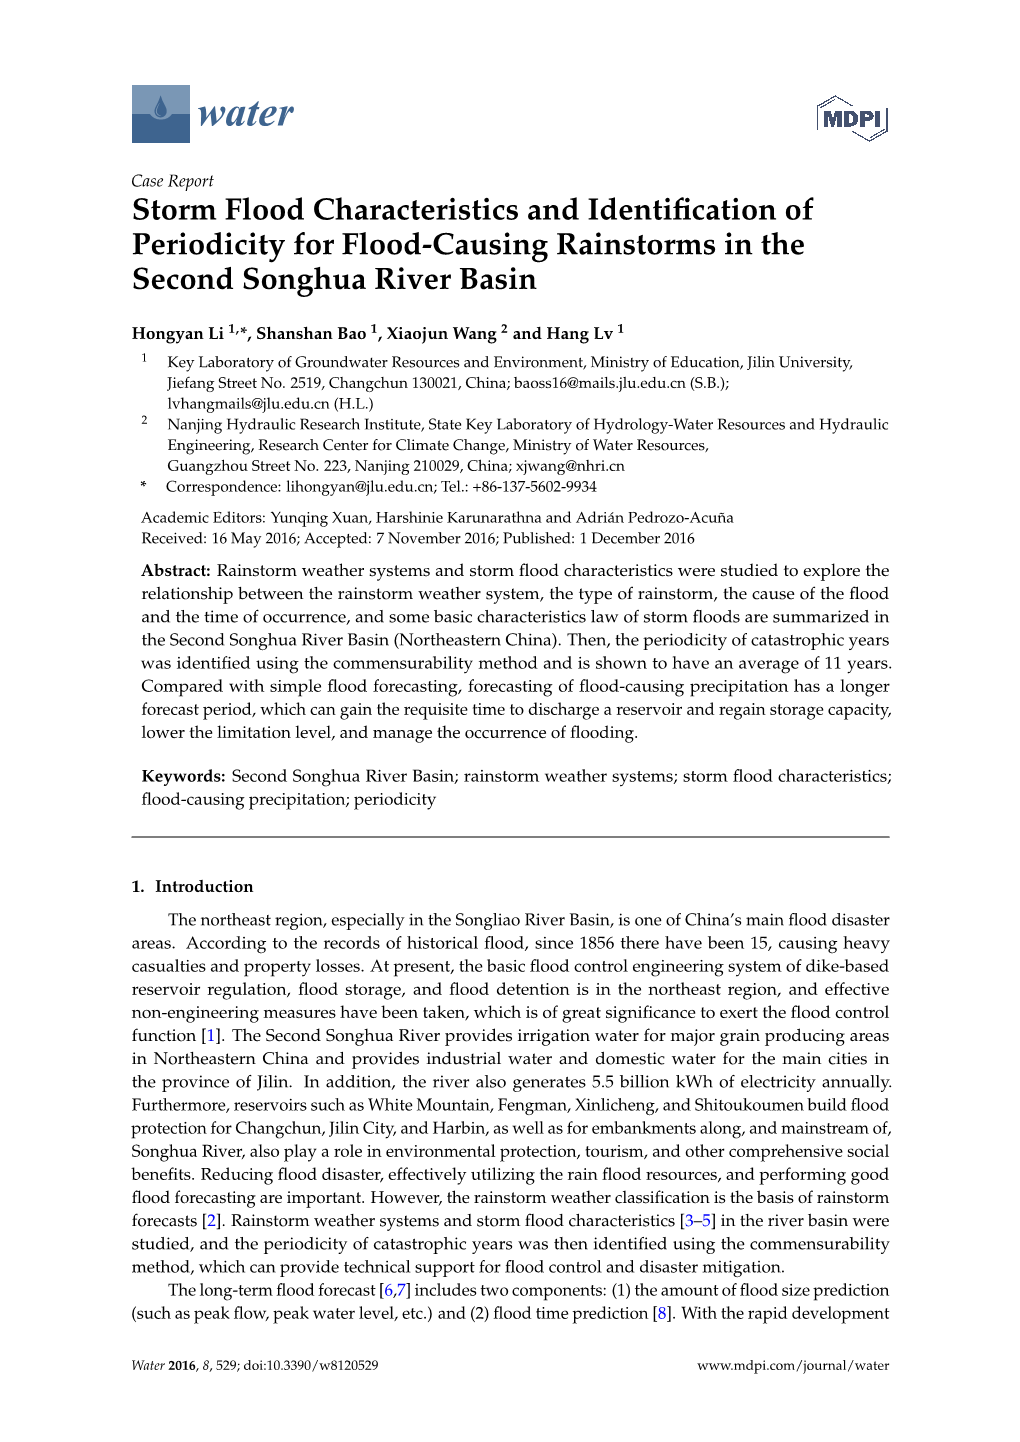 Storm Flood Characteristics and Identification of Periodicity for Flood